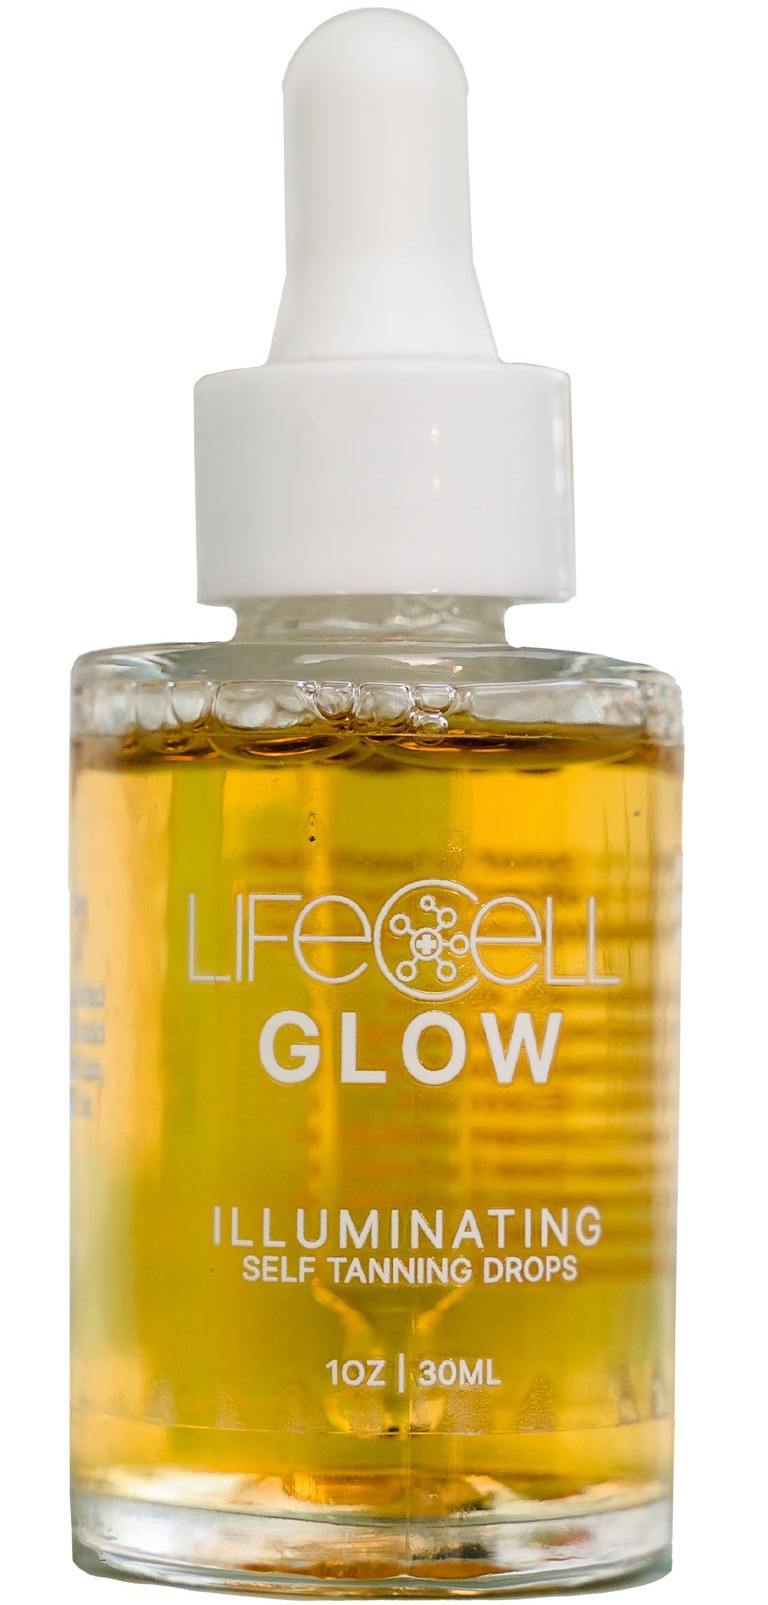 LifeCell Glow